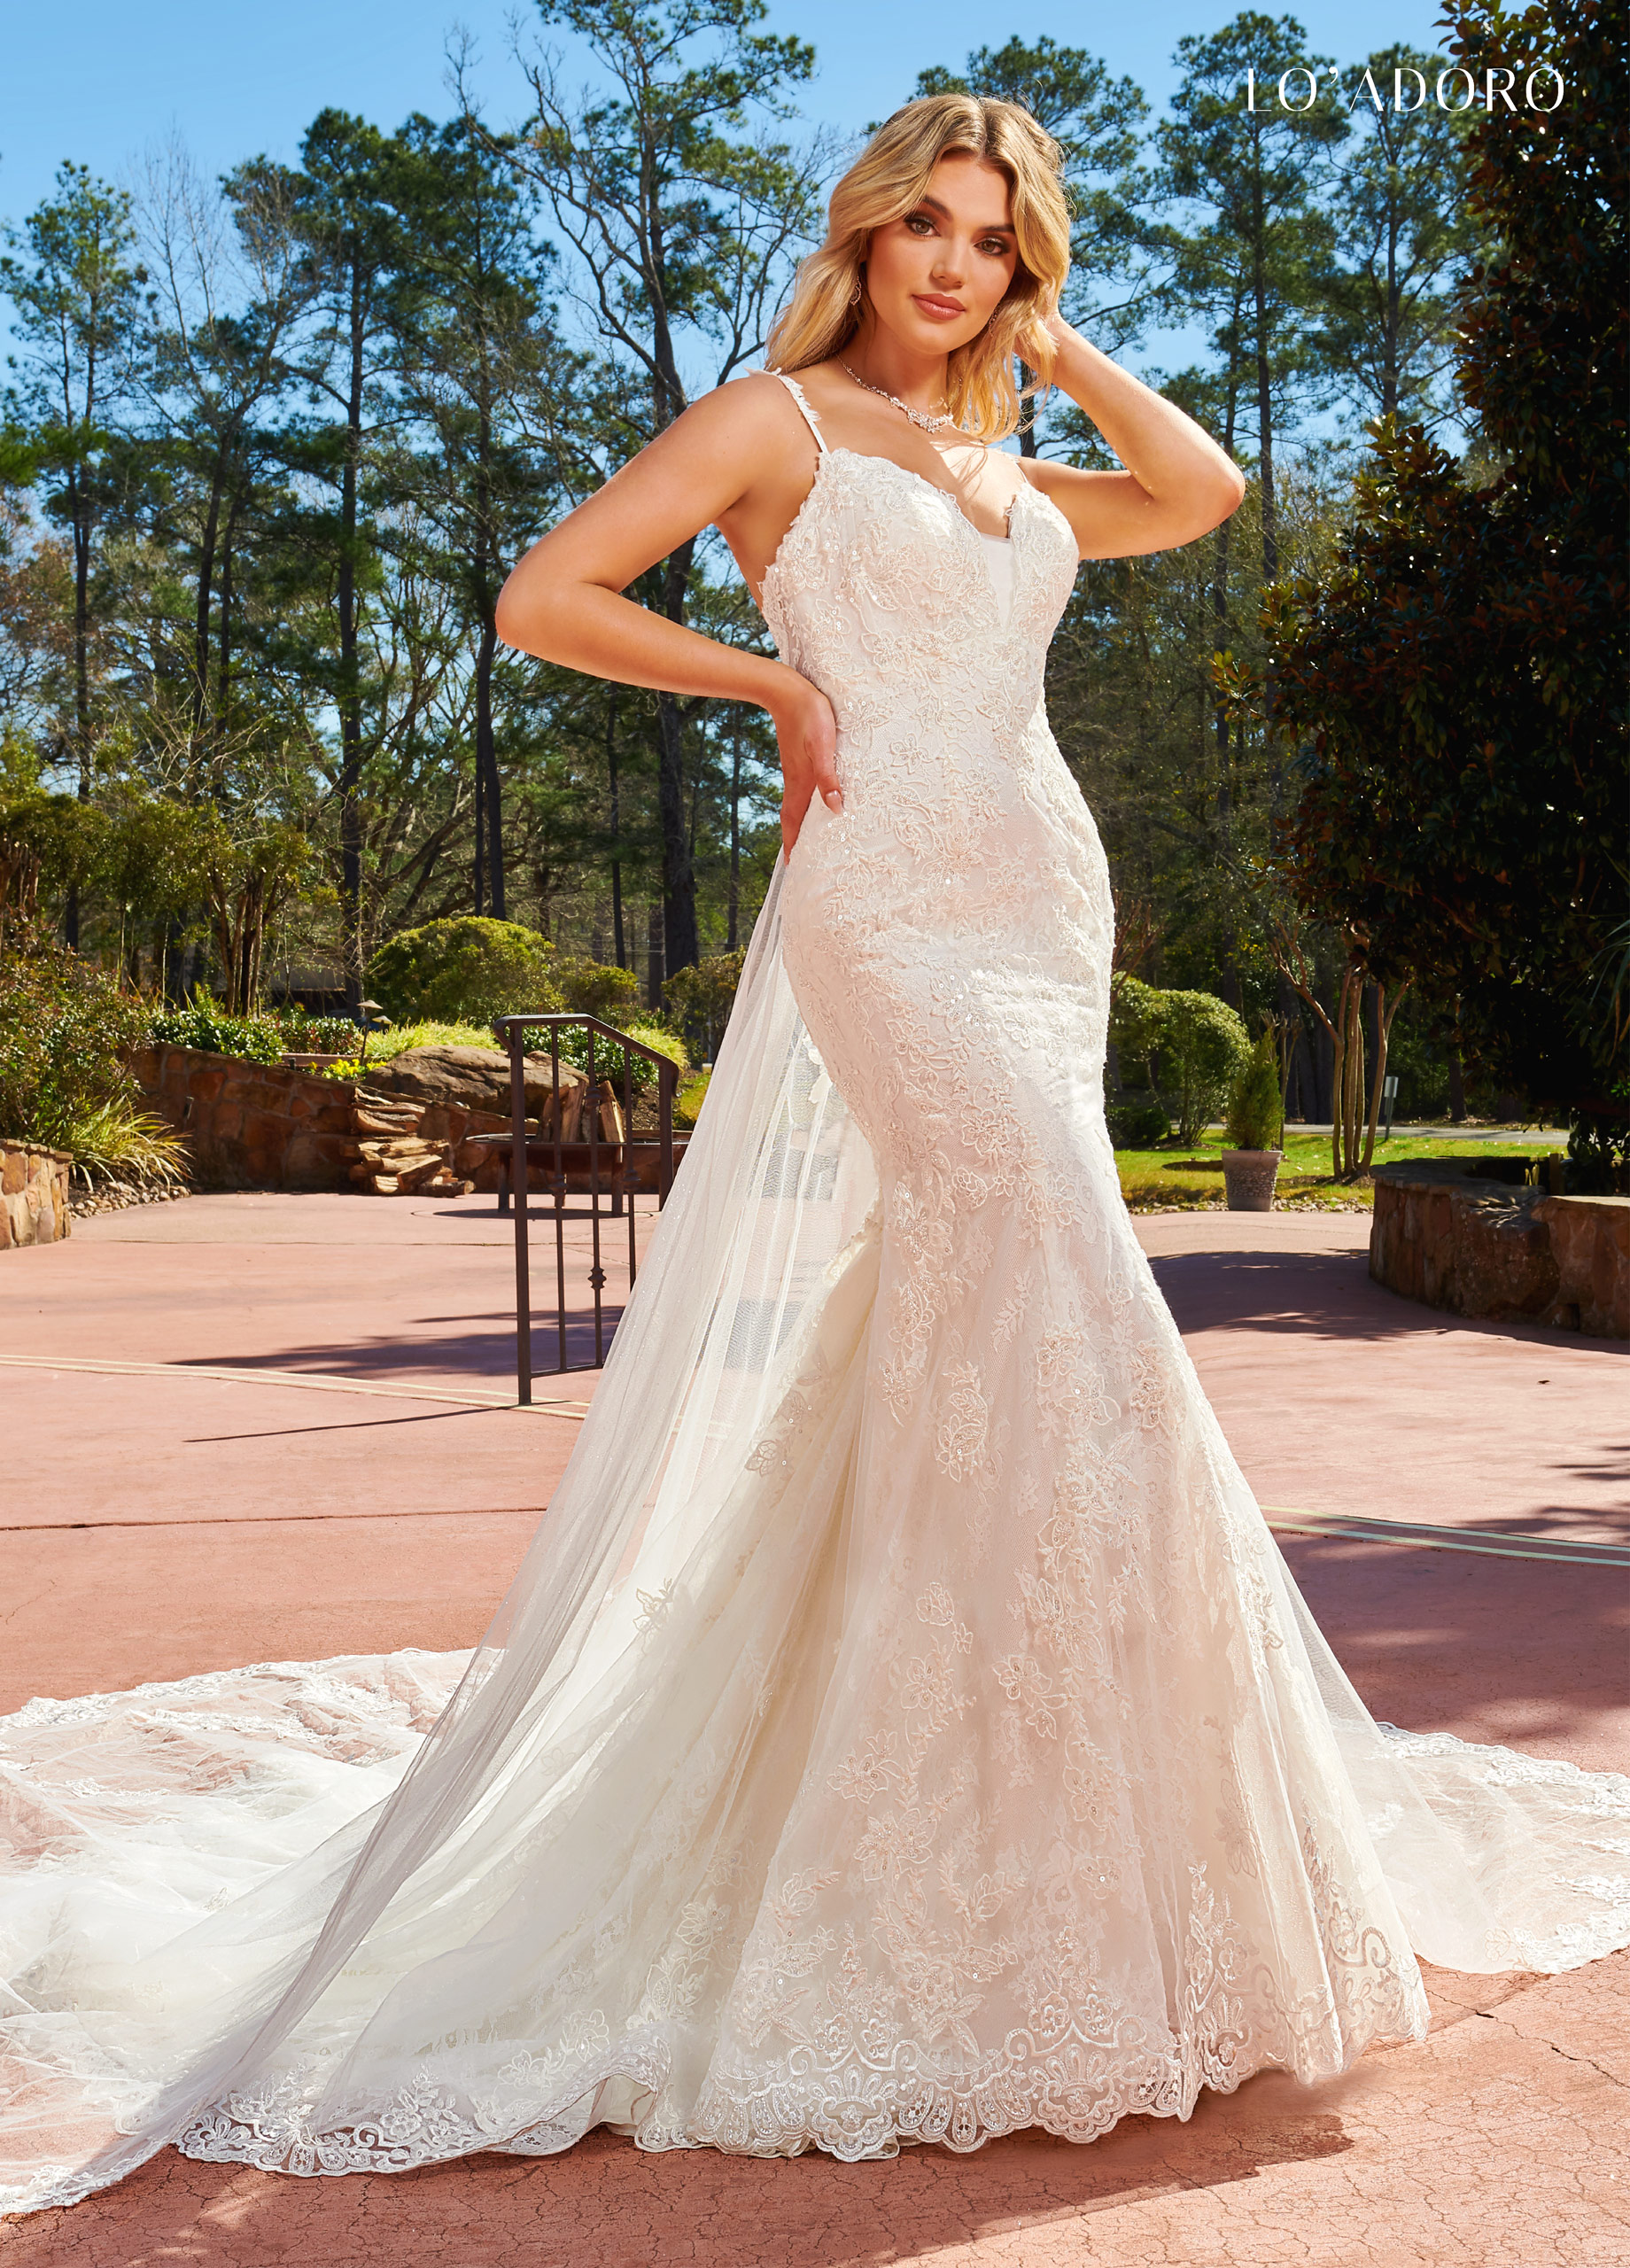 Sweetheart Fit & Flare Lo' Adoro Bridal in White Color